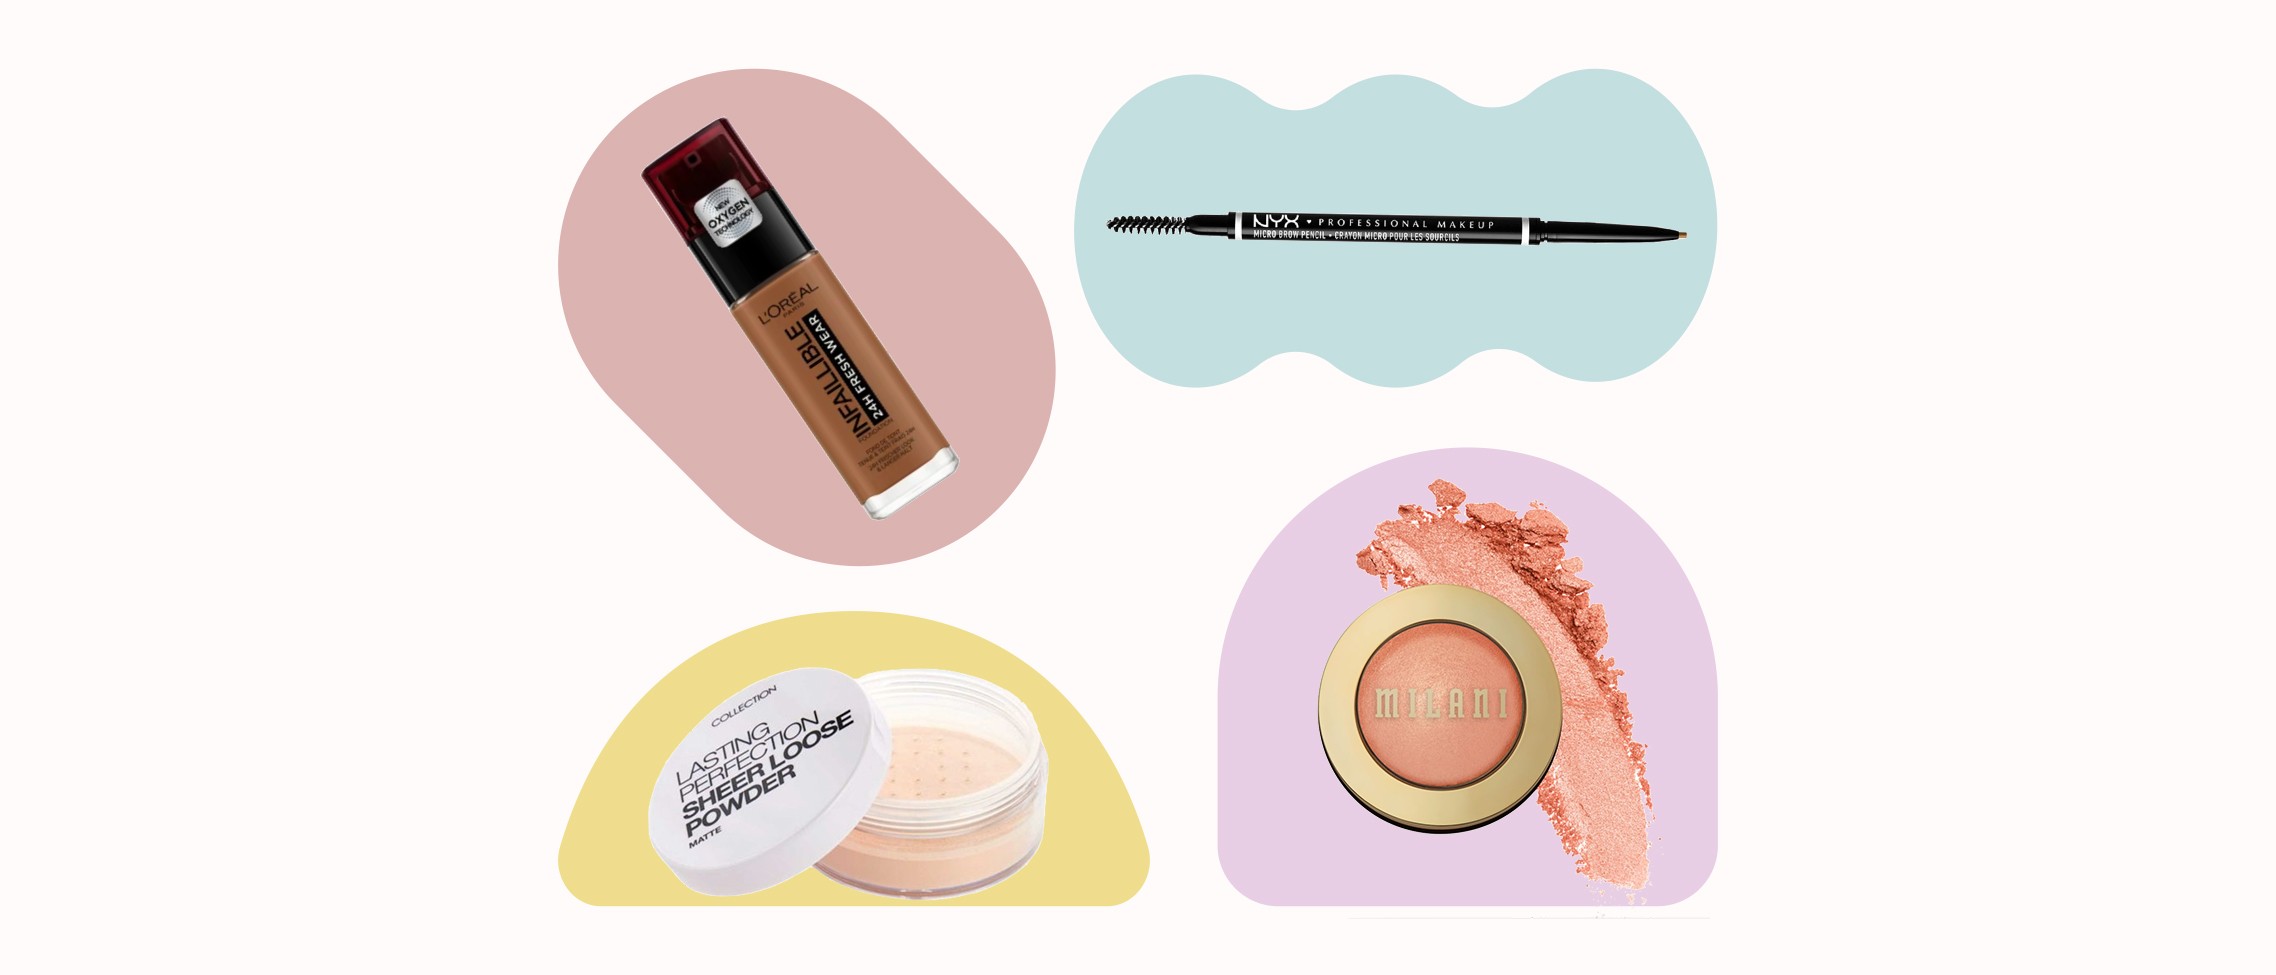 Ball on a Budget With These Amazing Beauty and Fashion Dupes